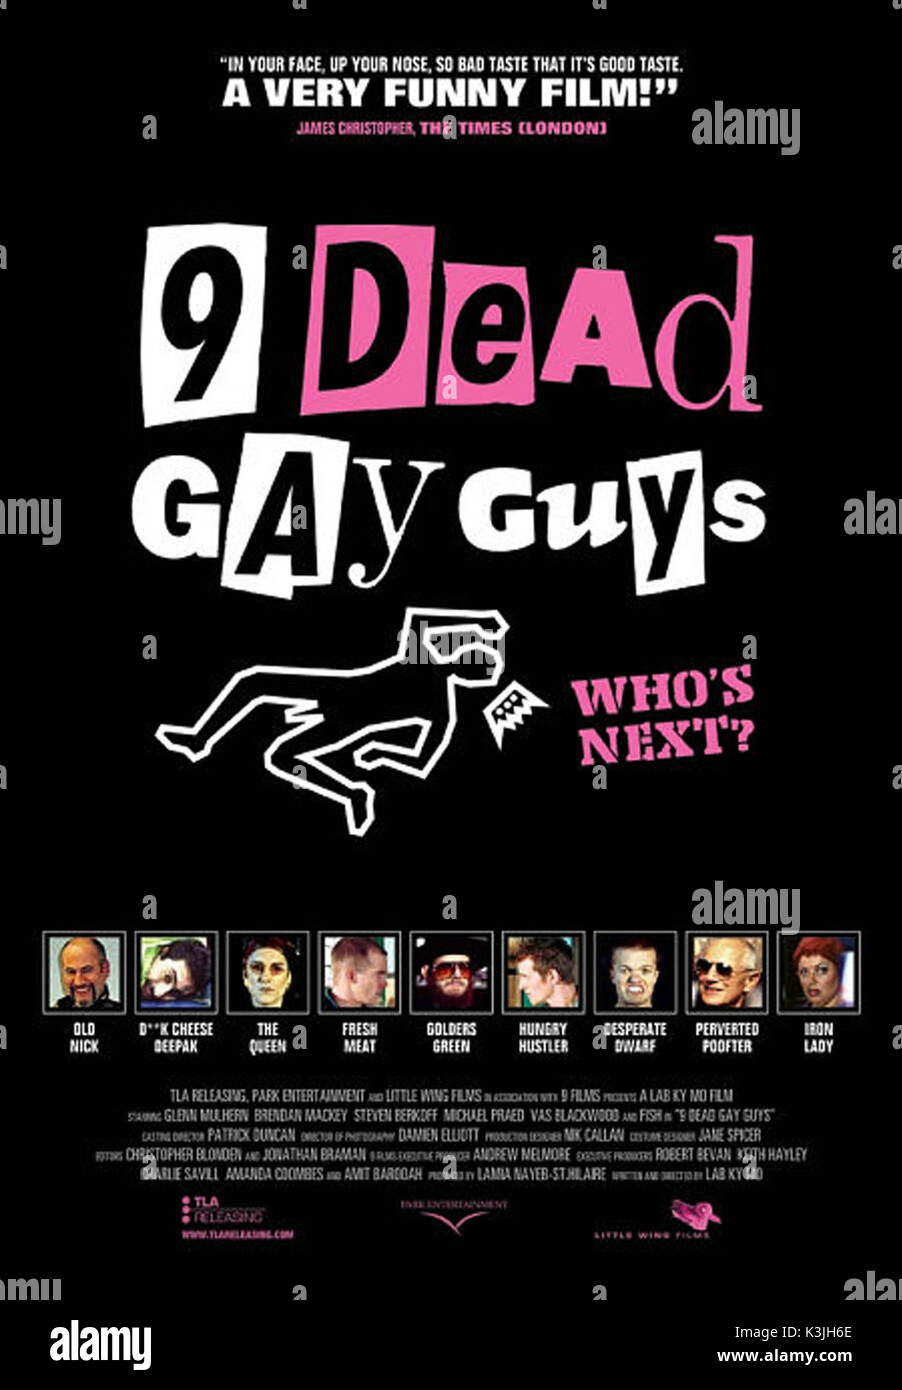 9 Dead Gay Guys Date : 2002 Banque D'Images